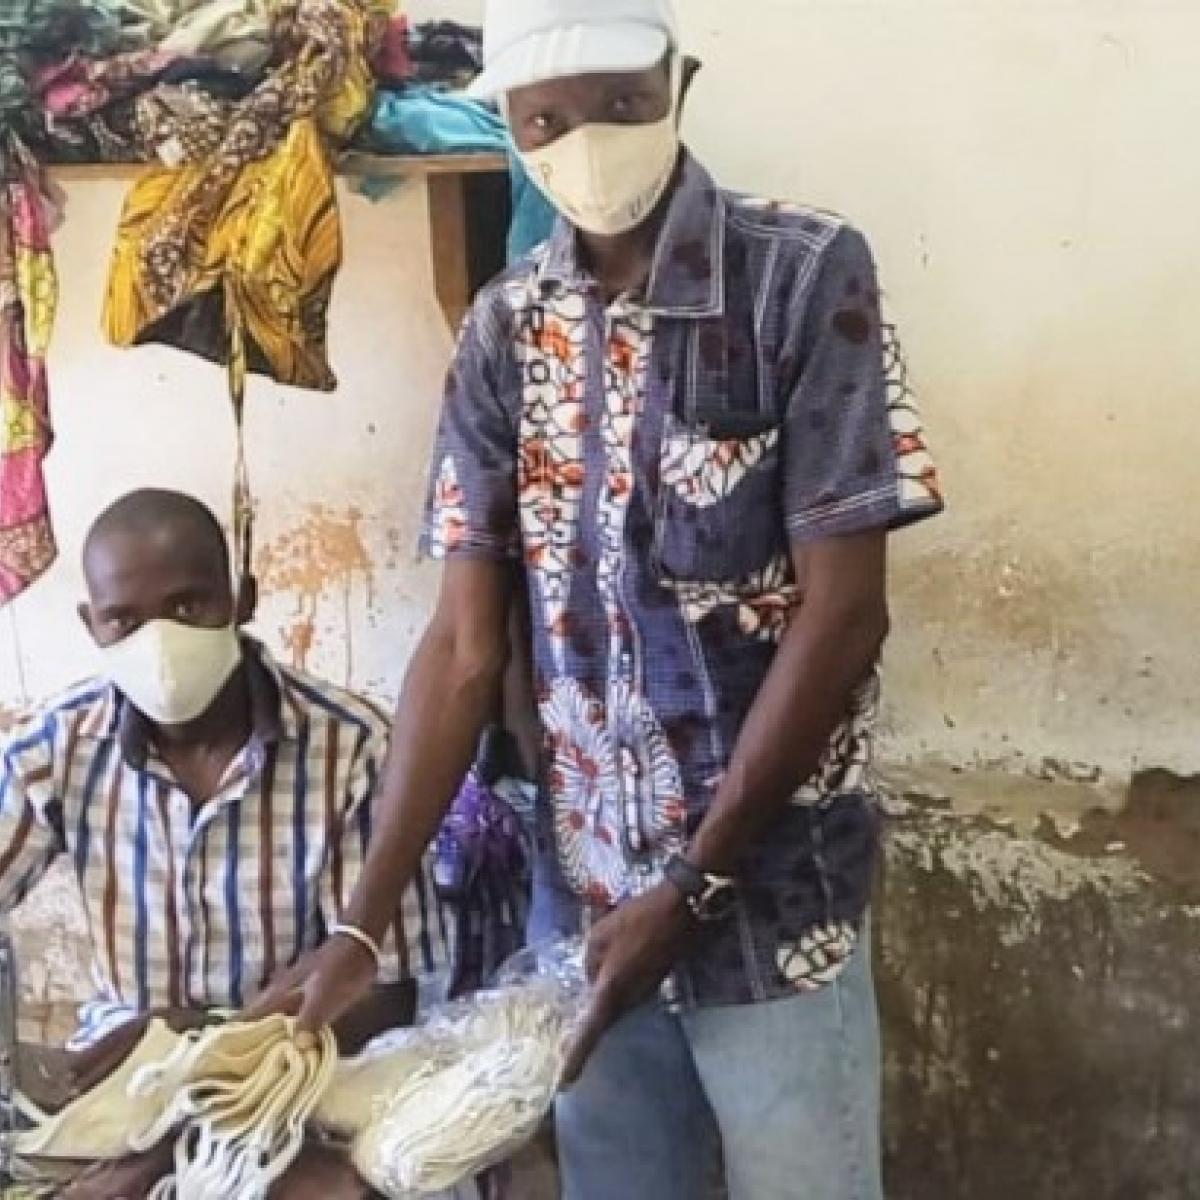 Baba Napo standing at a tailors’ shop collecting an order of face masks